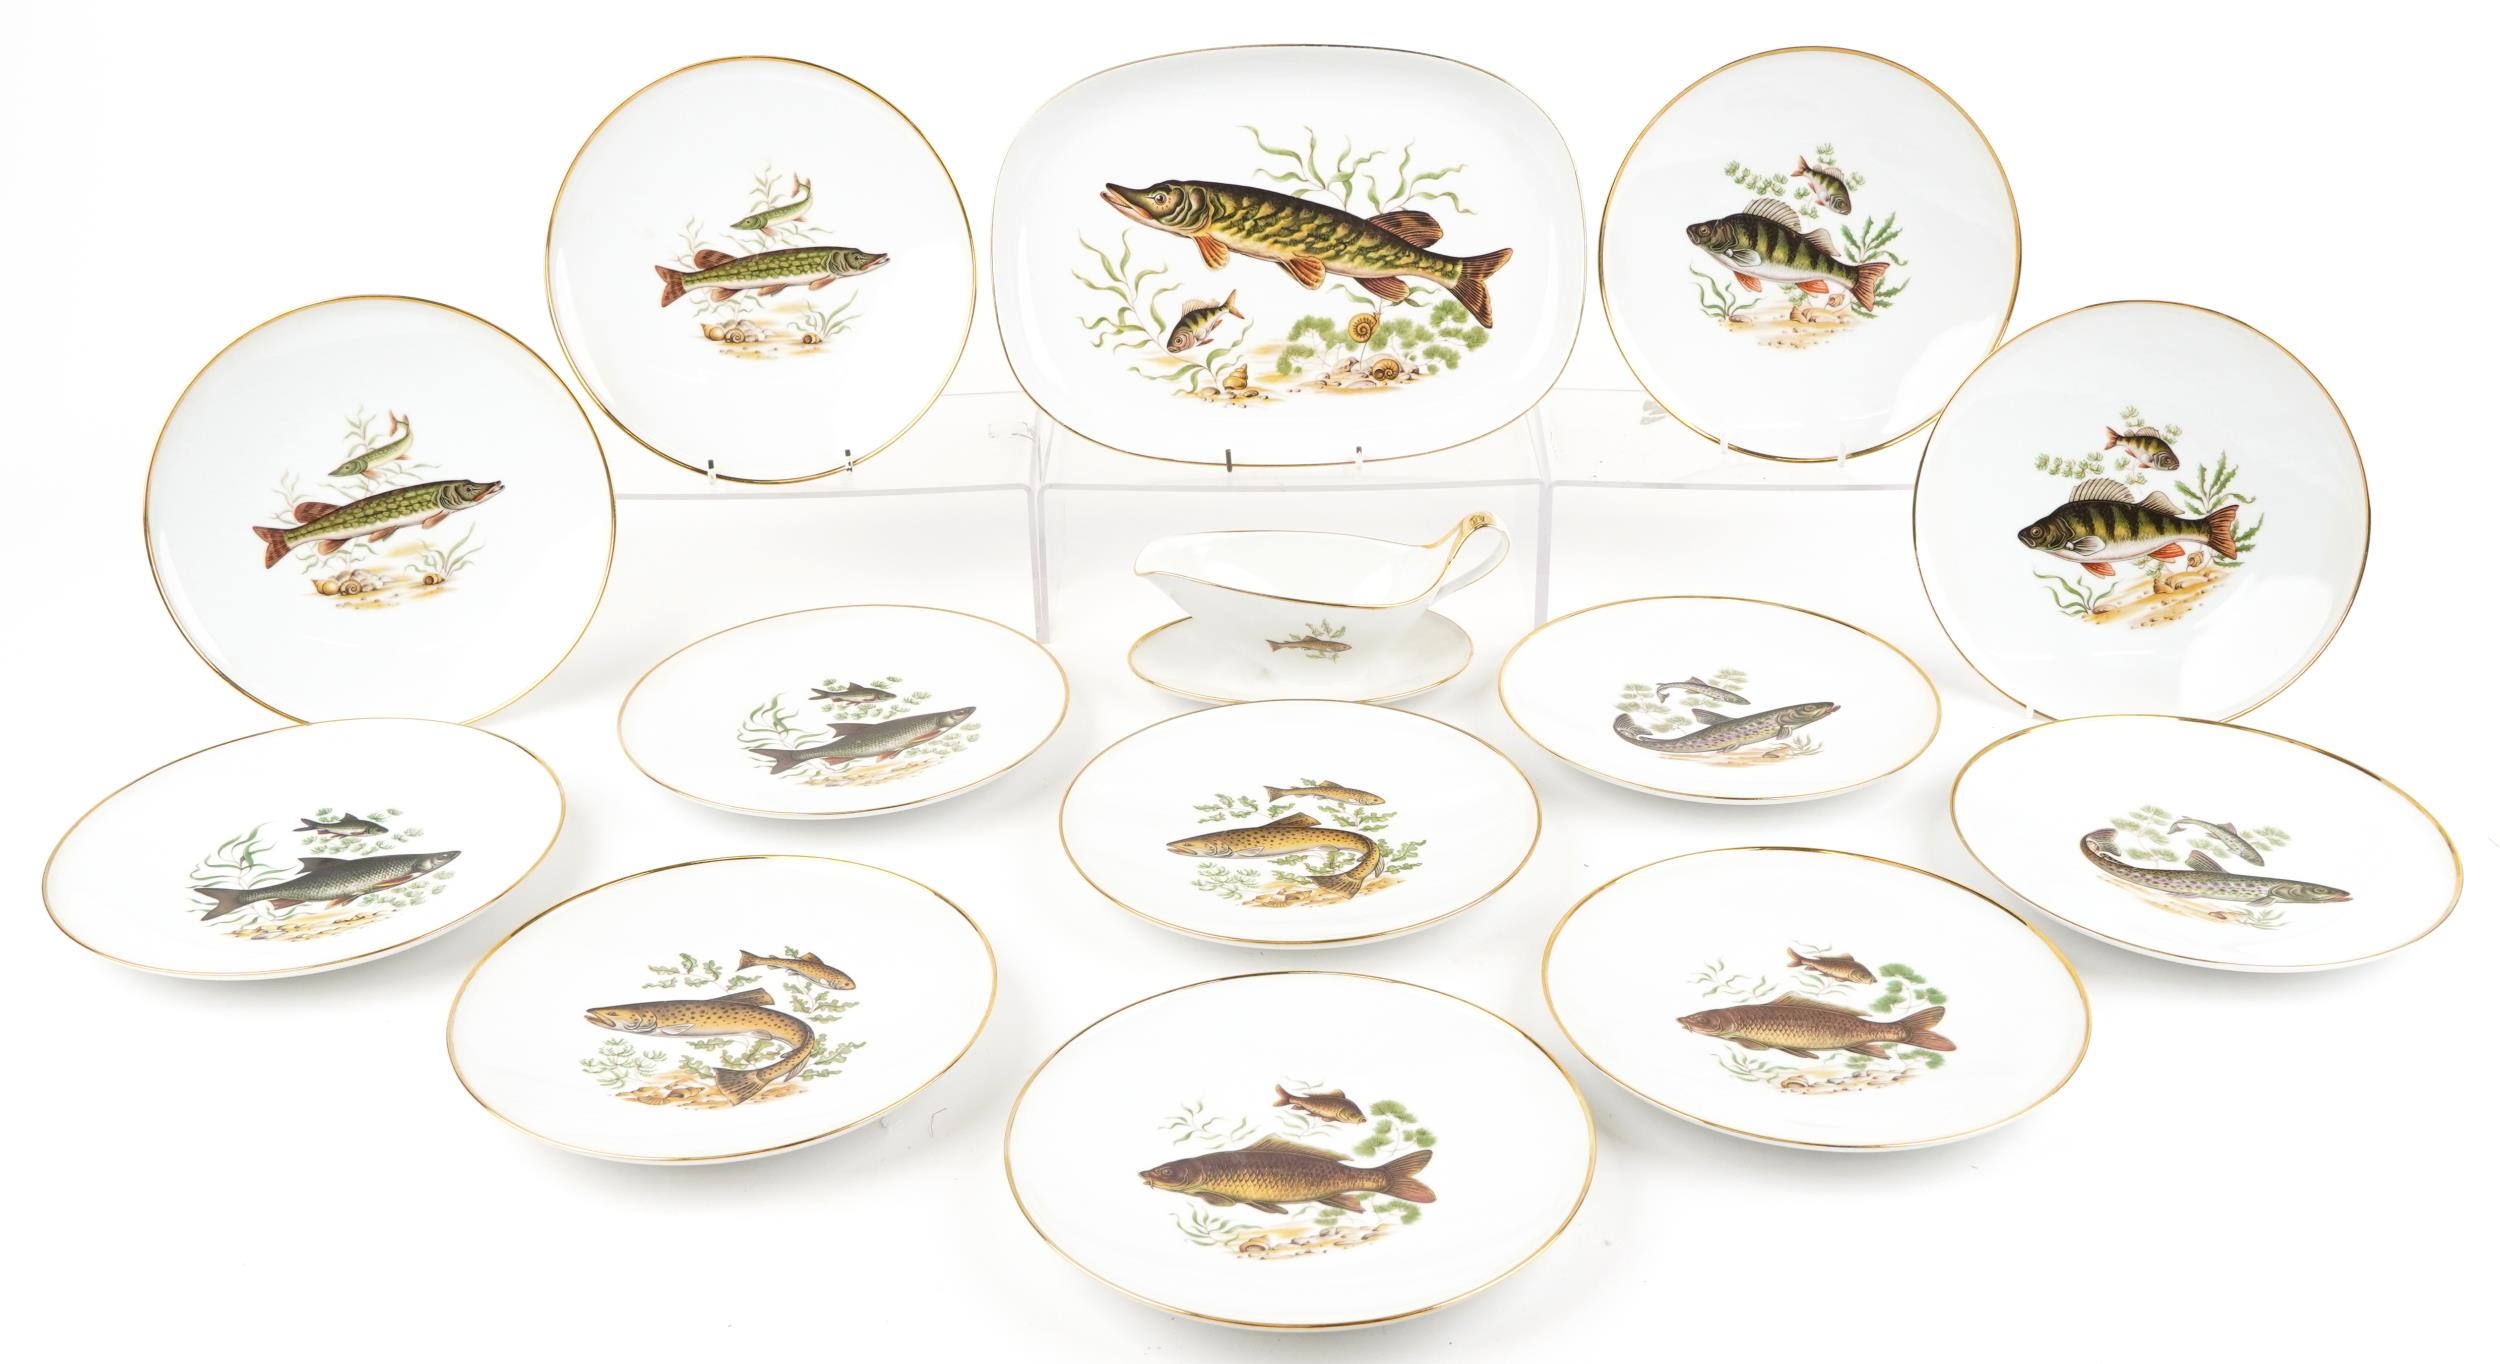 J K W Decor Carlsbad, Bavarian porcelain fish service decorated with various fish comprising